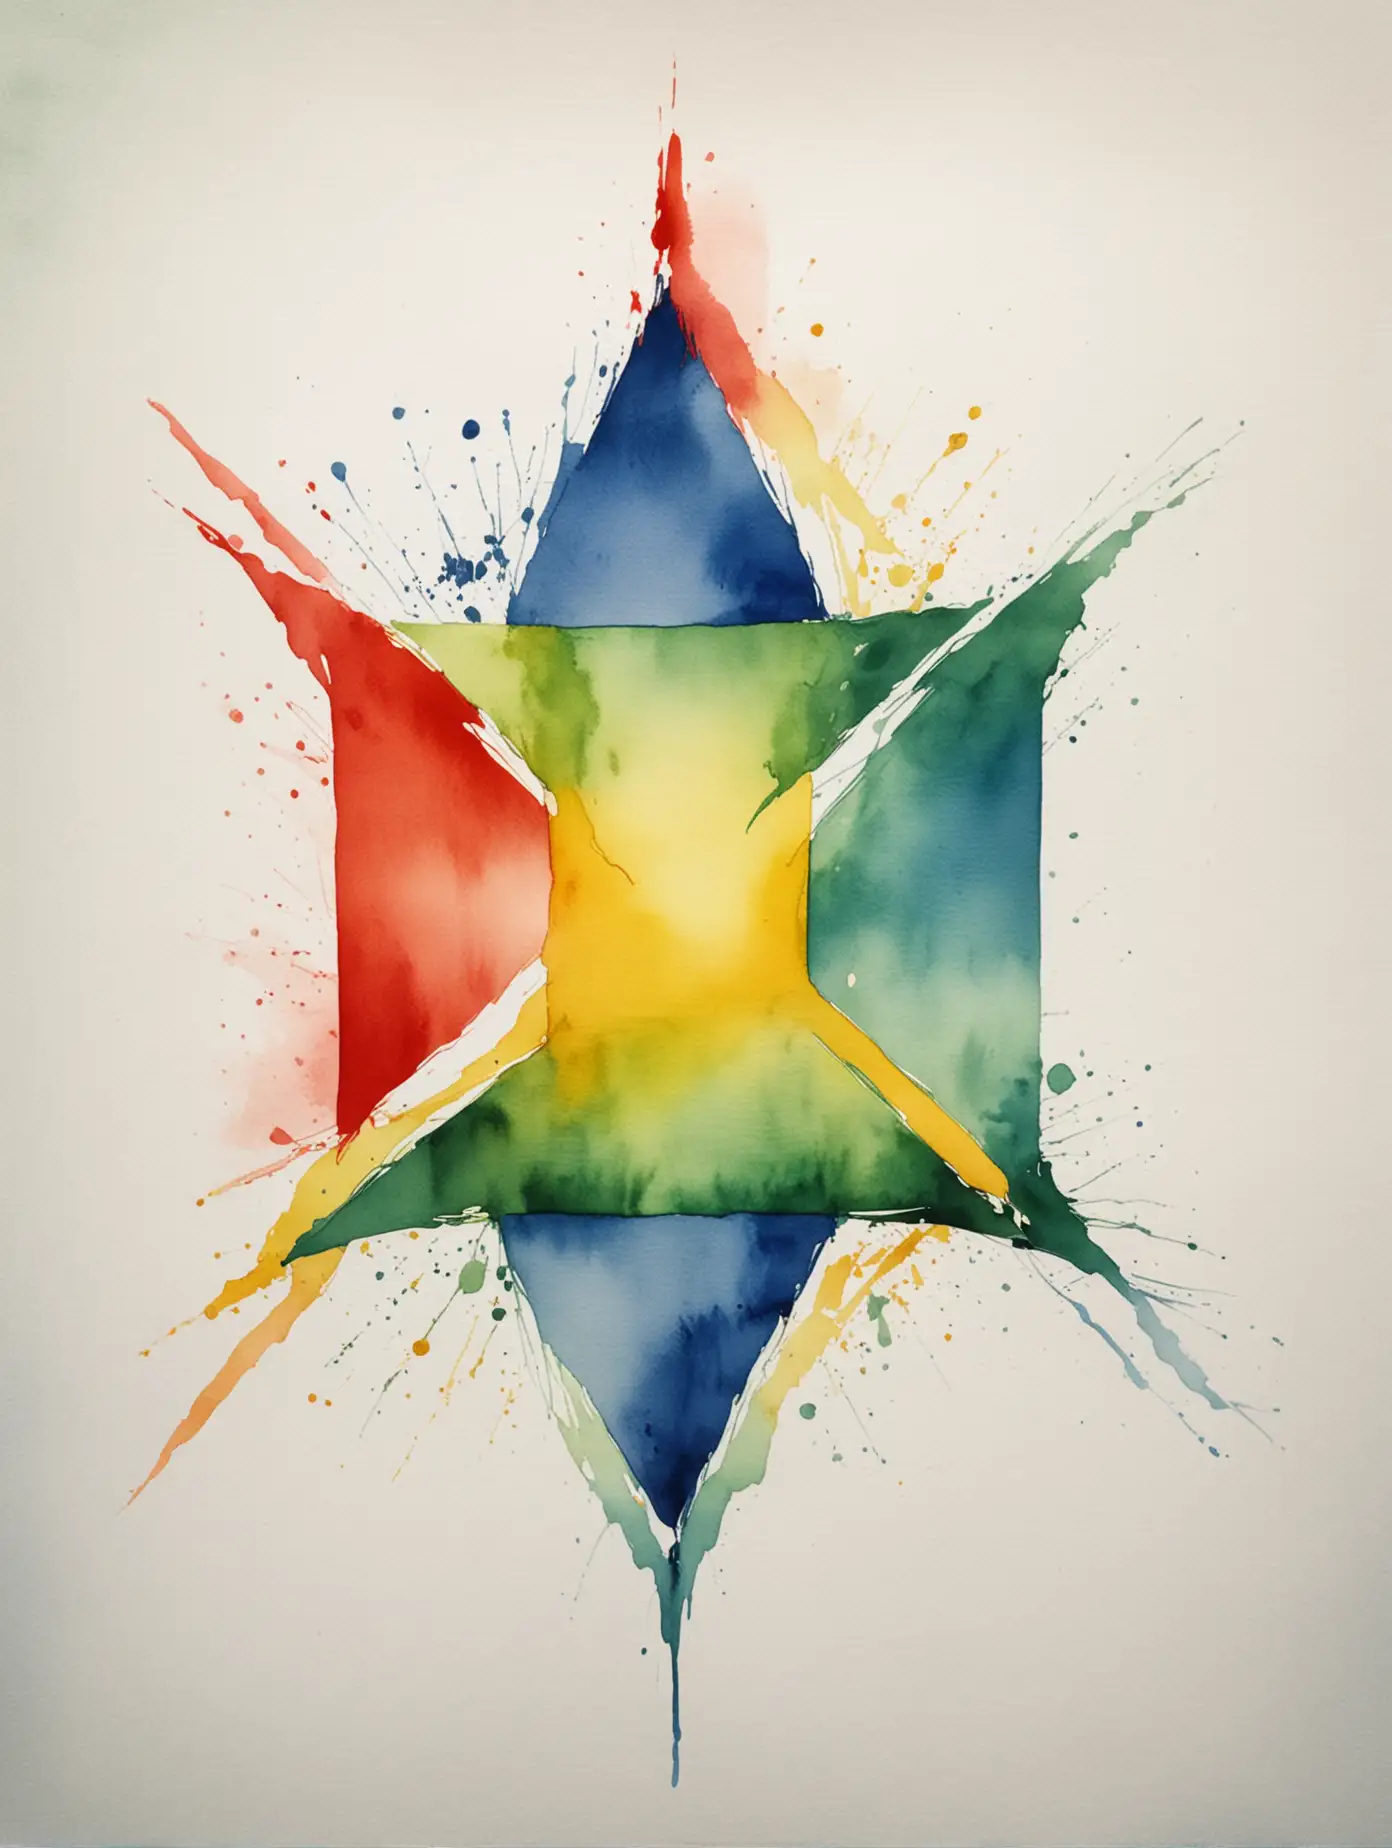 Vibrant Abstract Watercolor Illustration with Red Blue Yellow and Green Hues